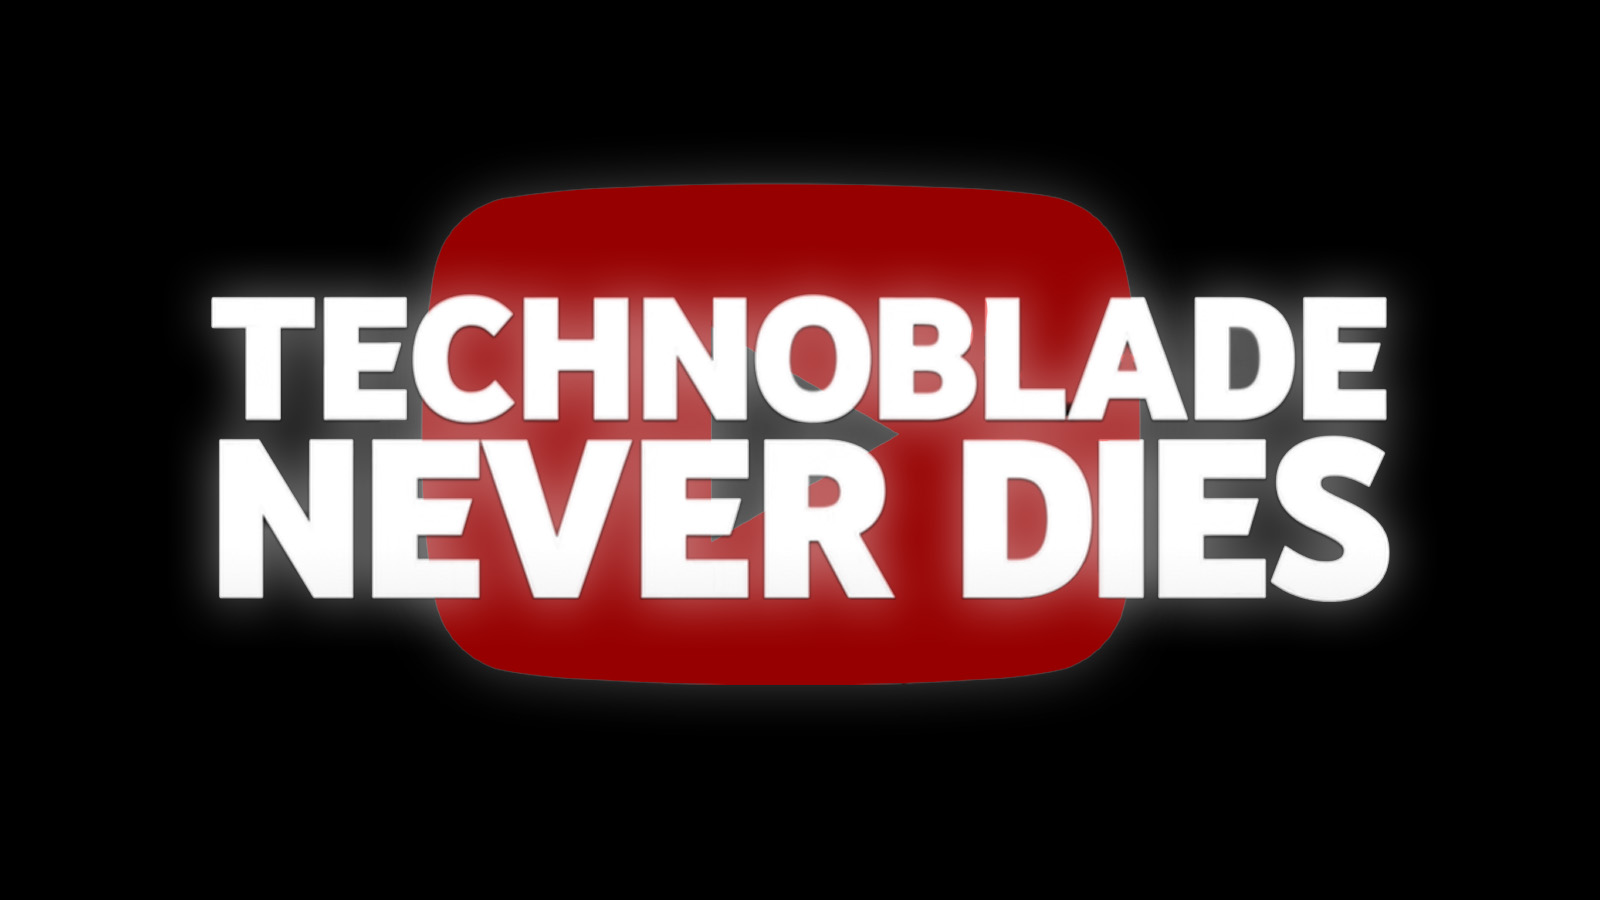 When  created a tribute video for Technoblade titled